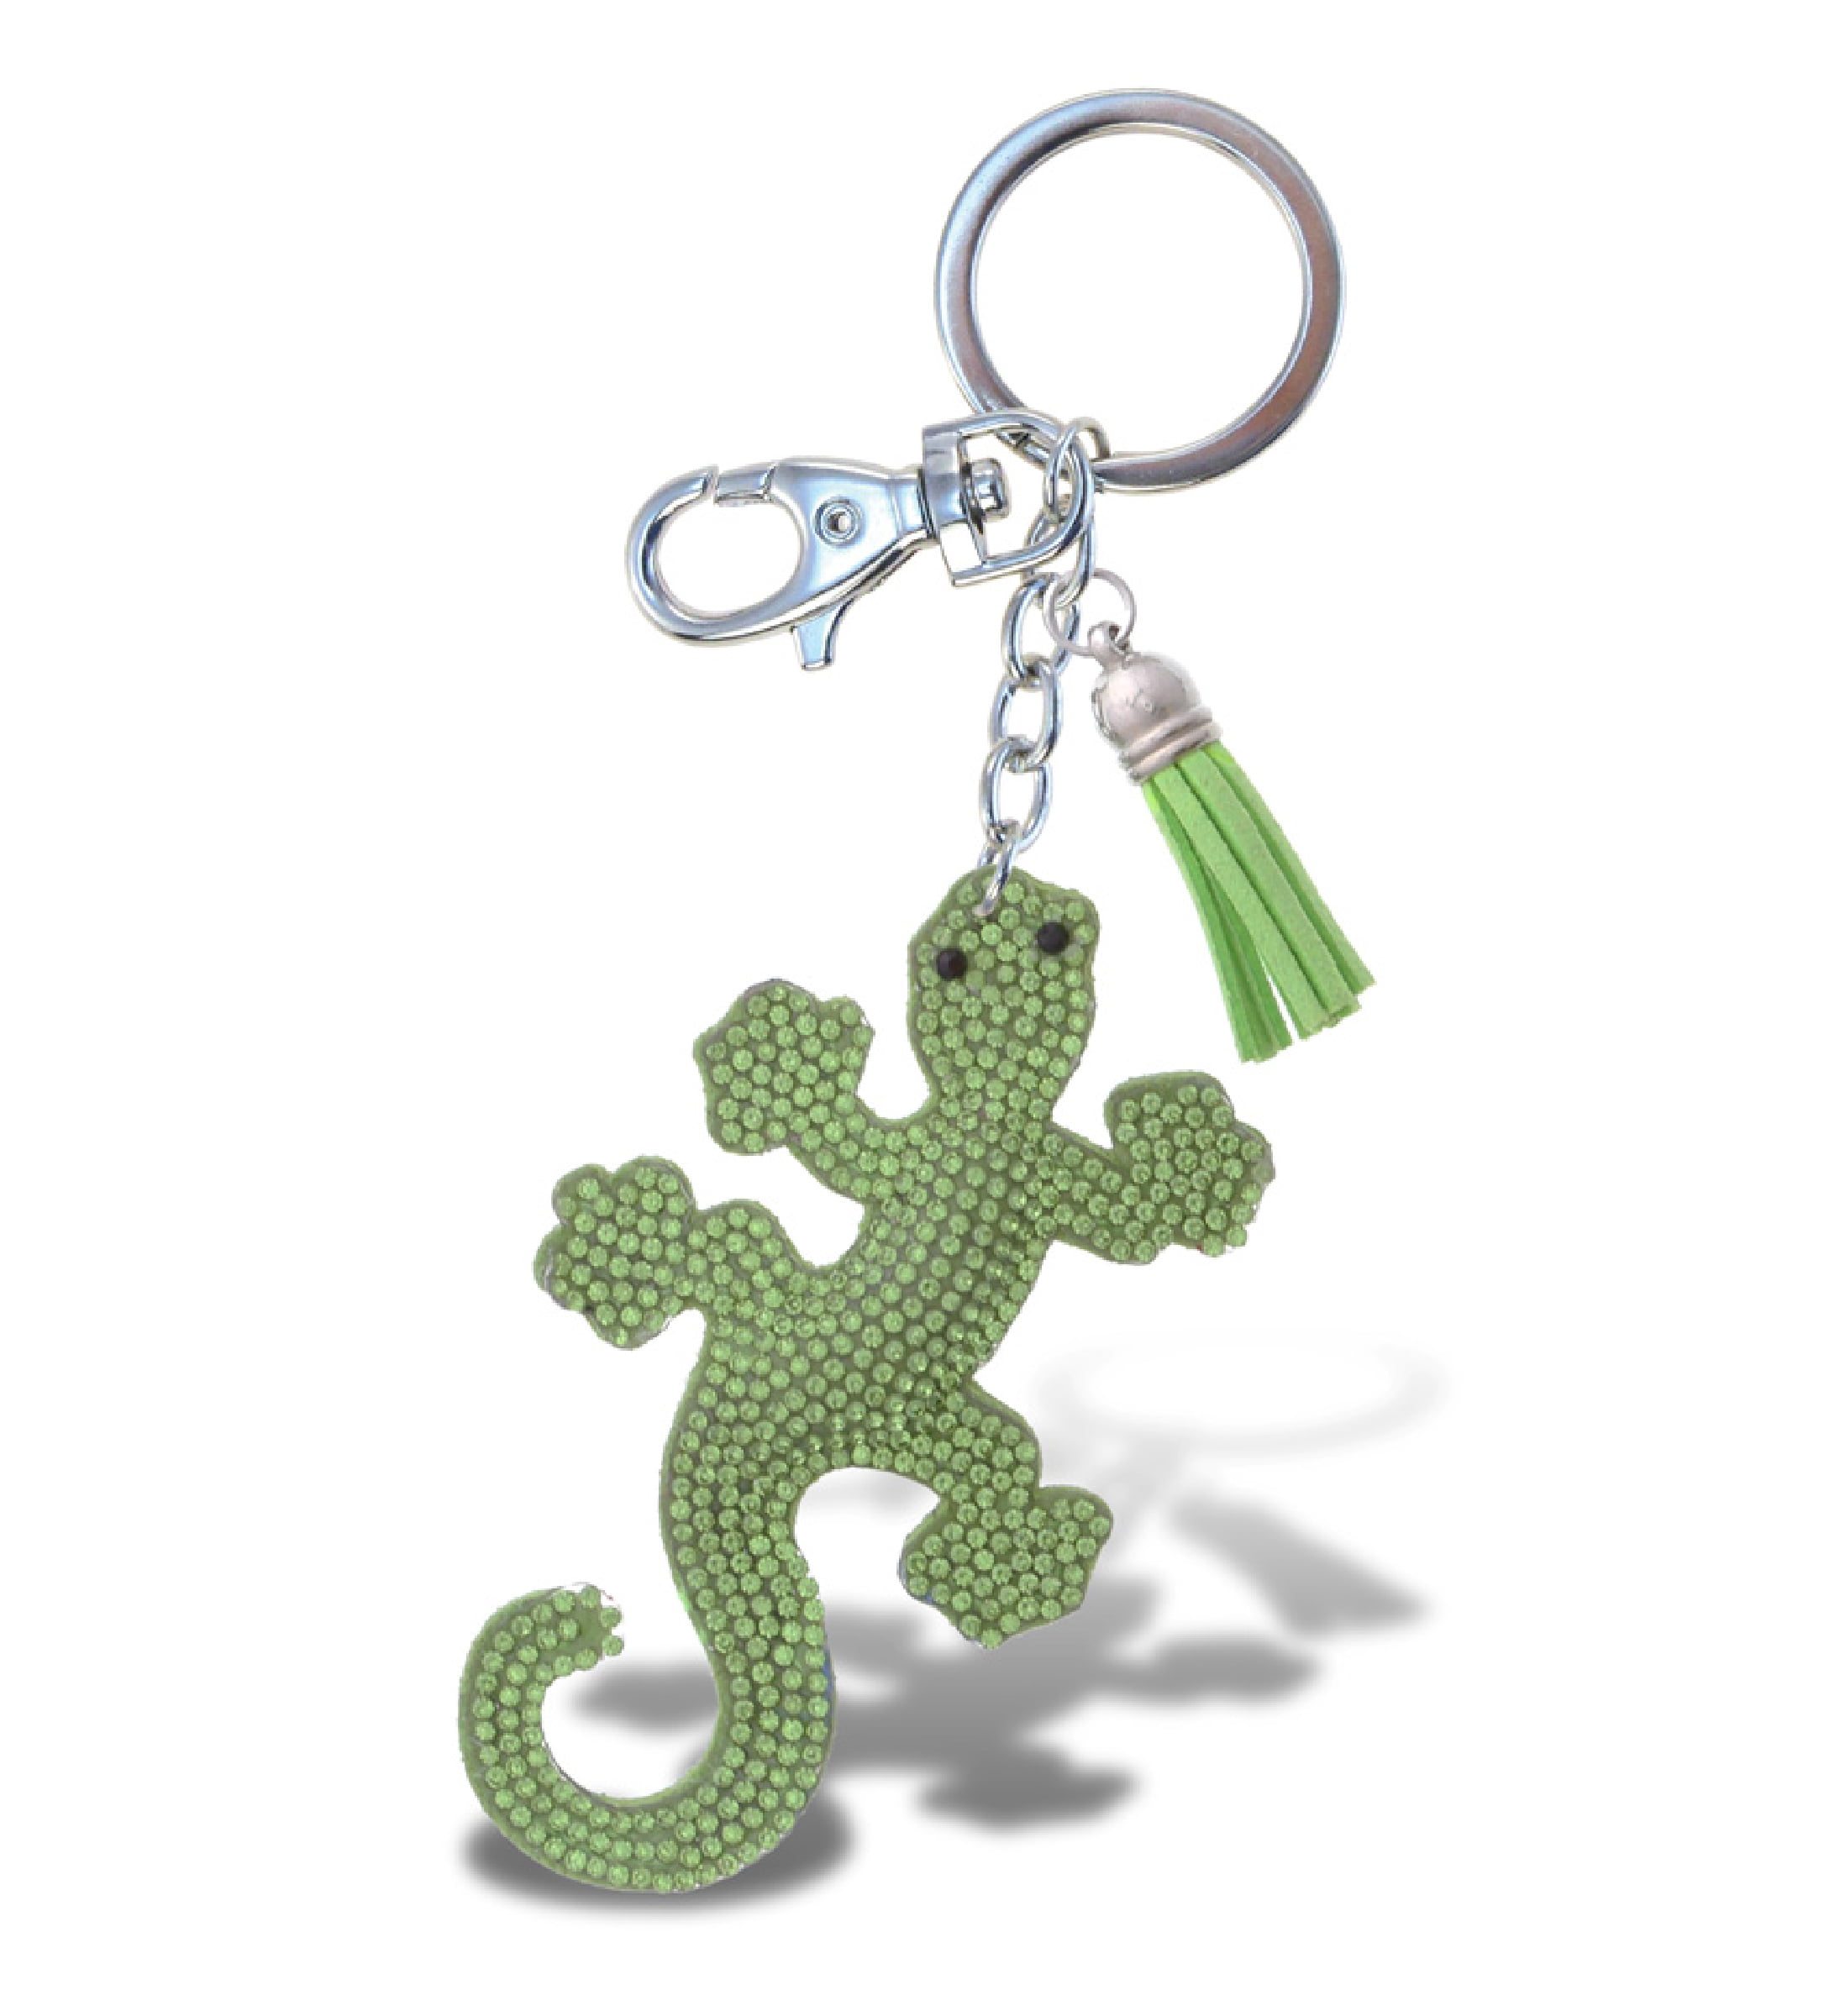 5.25 Inches Long Value Arts Bejeweled Green Lizard Key Chain 